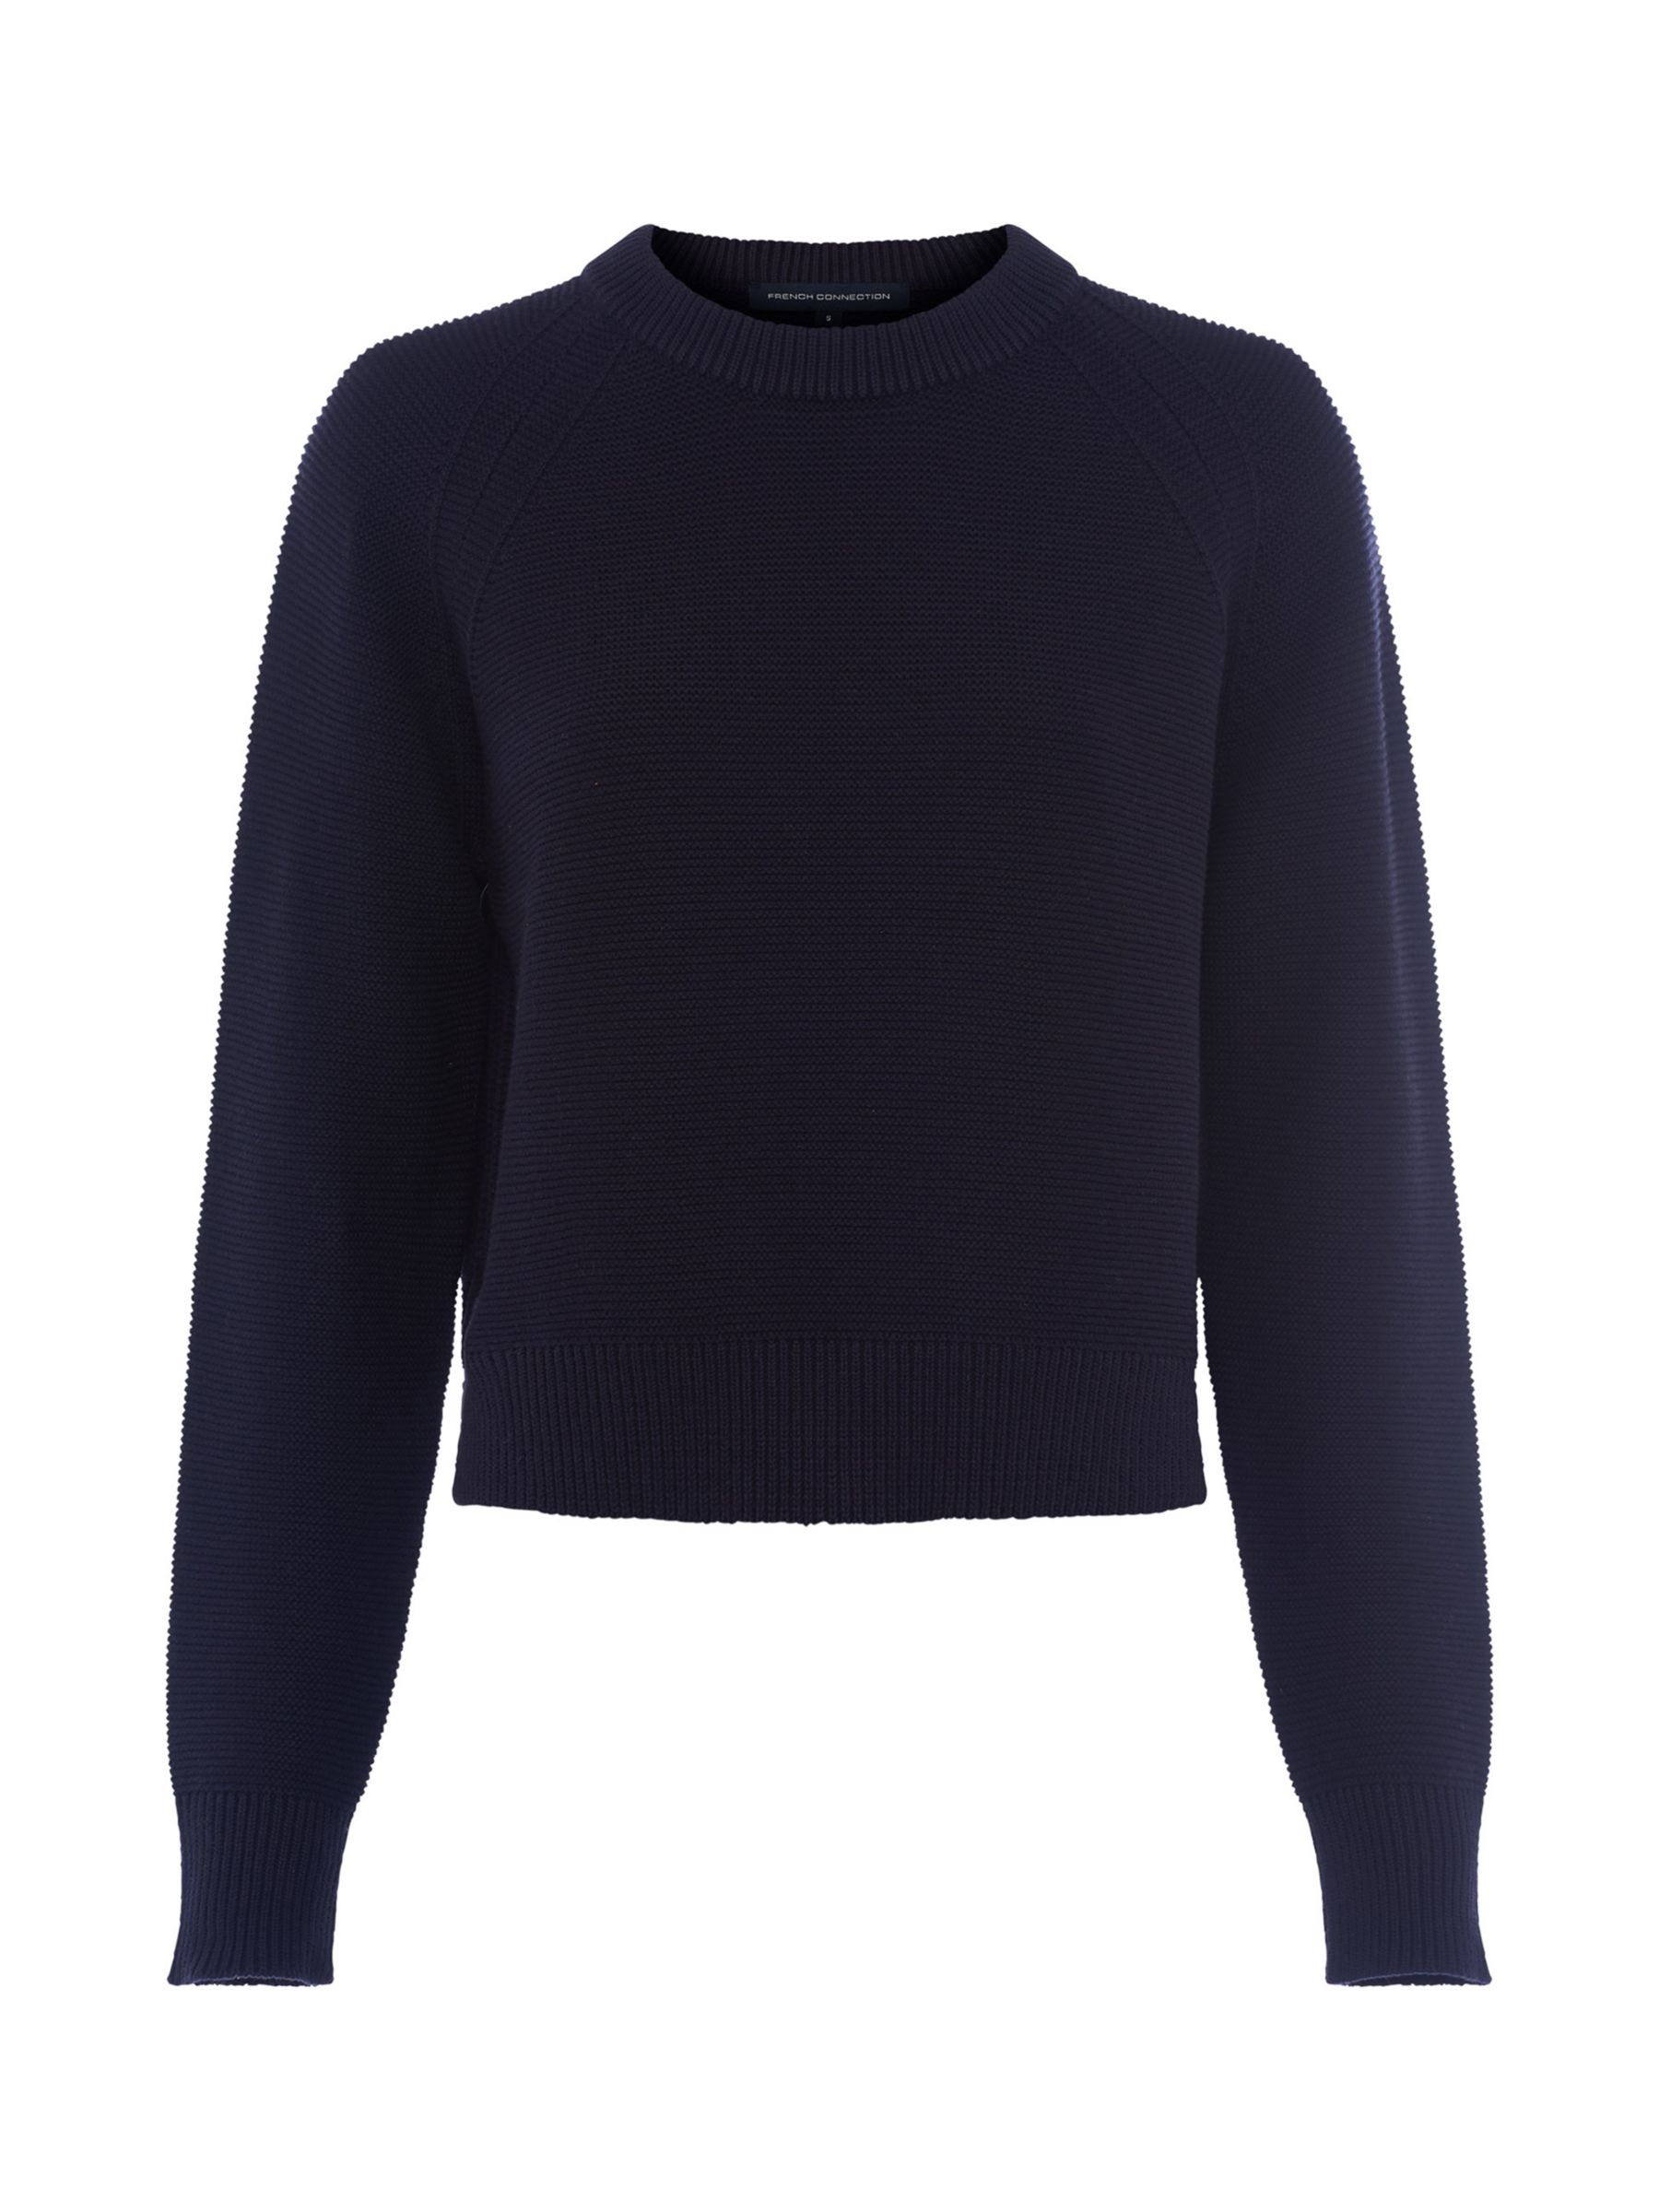 French Connection Lilly Mozart Crew Neck Jumper, Utility Blue, XS